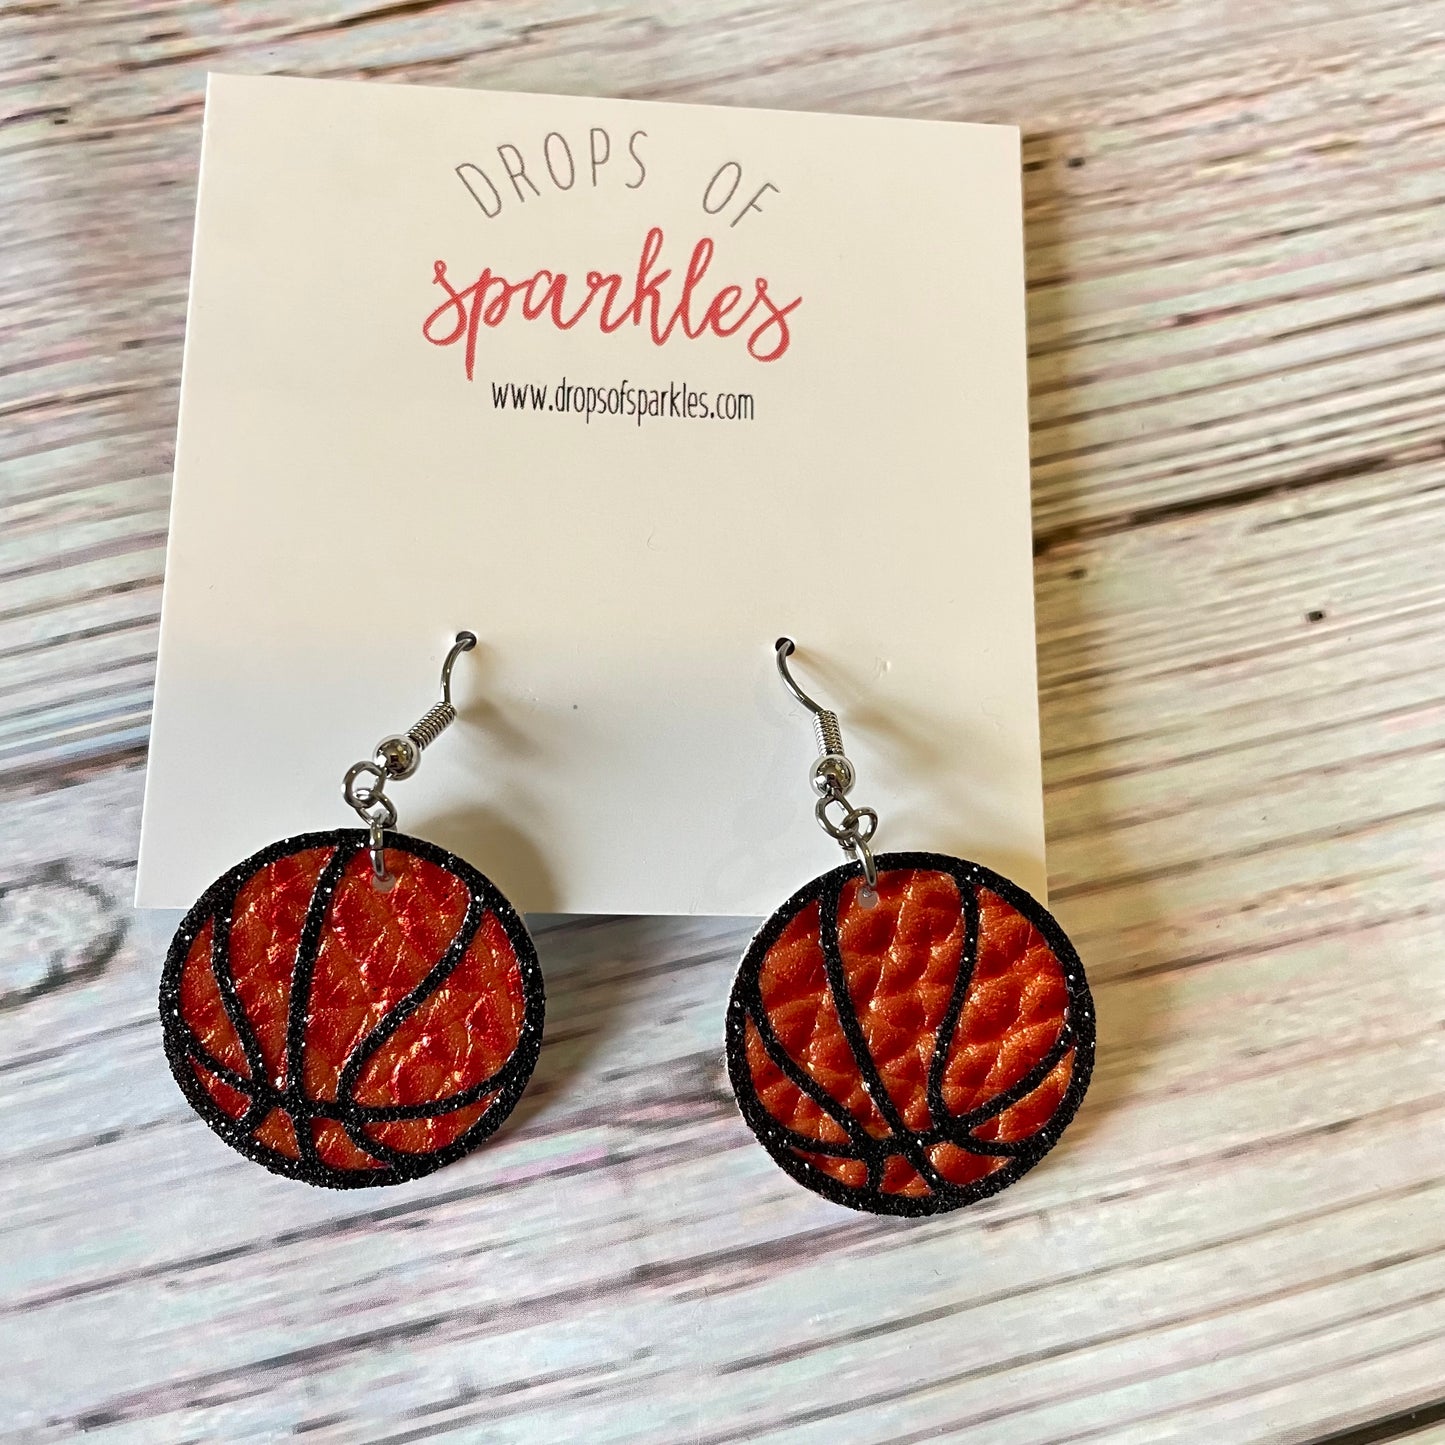 Basketball earrings made of faux orange pebbled leather with black glitter vinyl shown in 1 inch size.